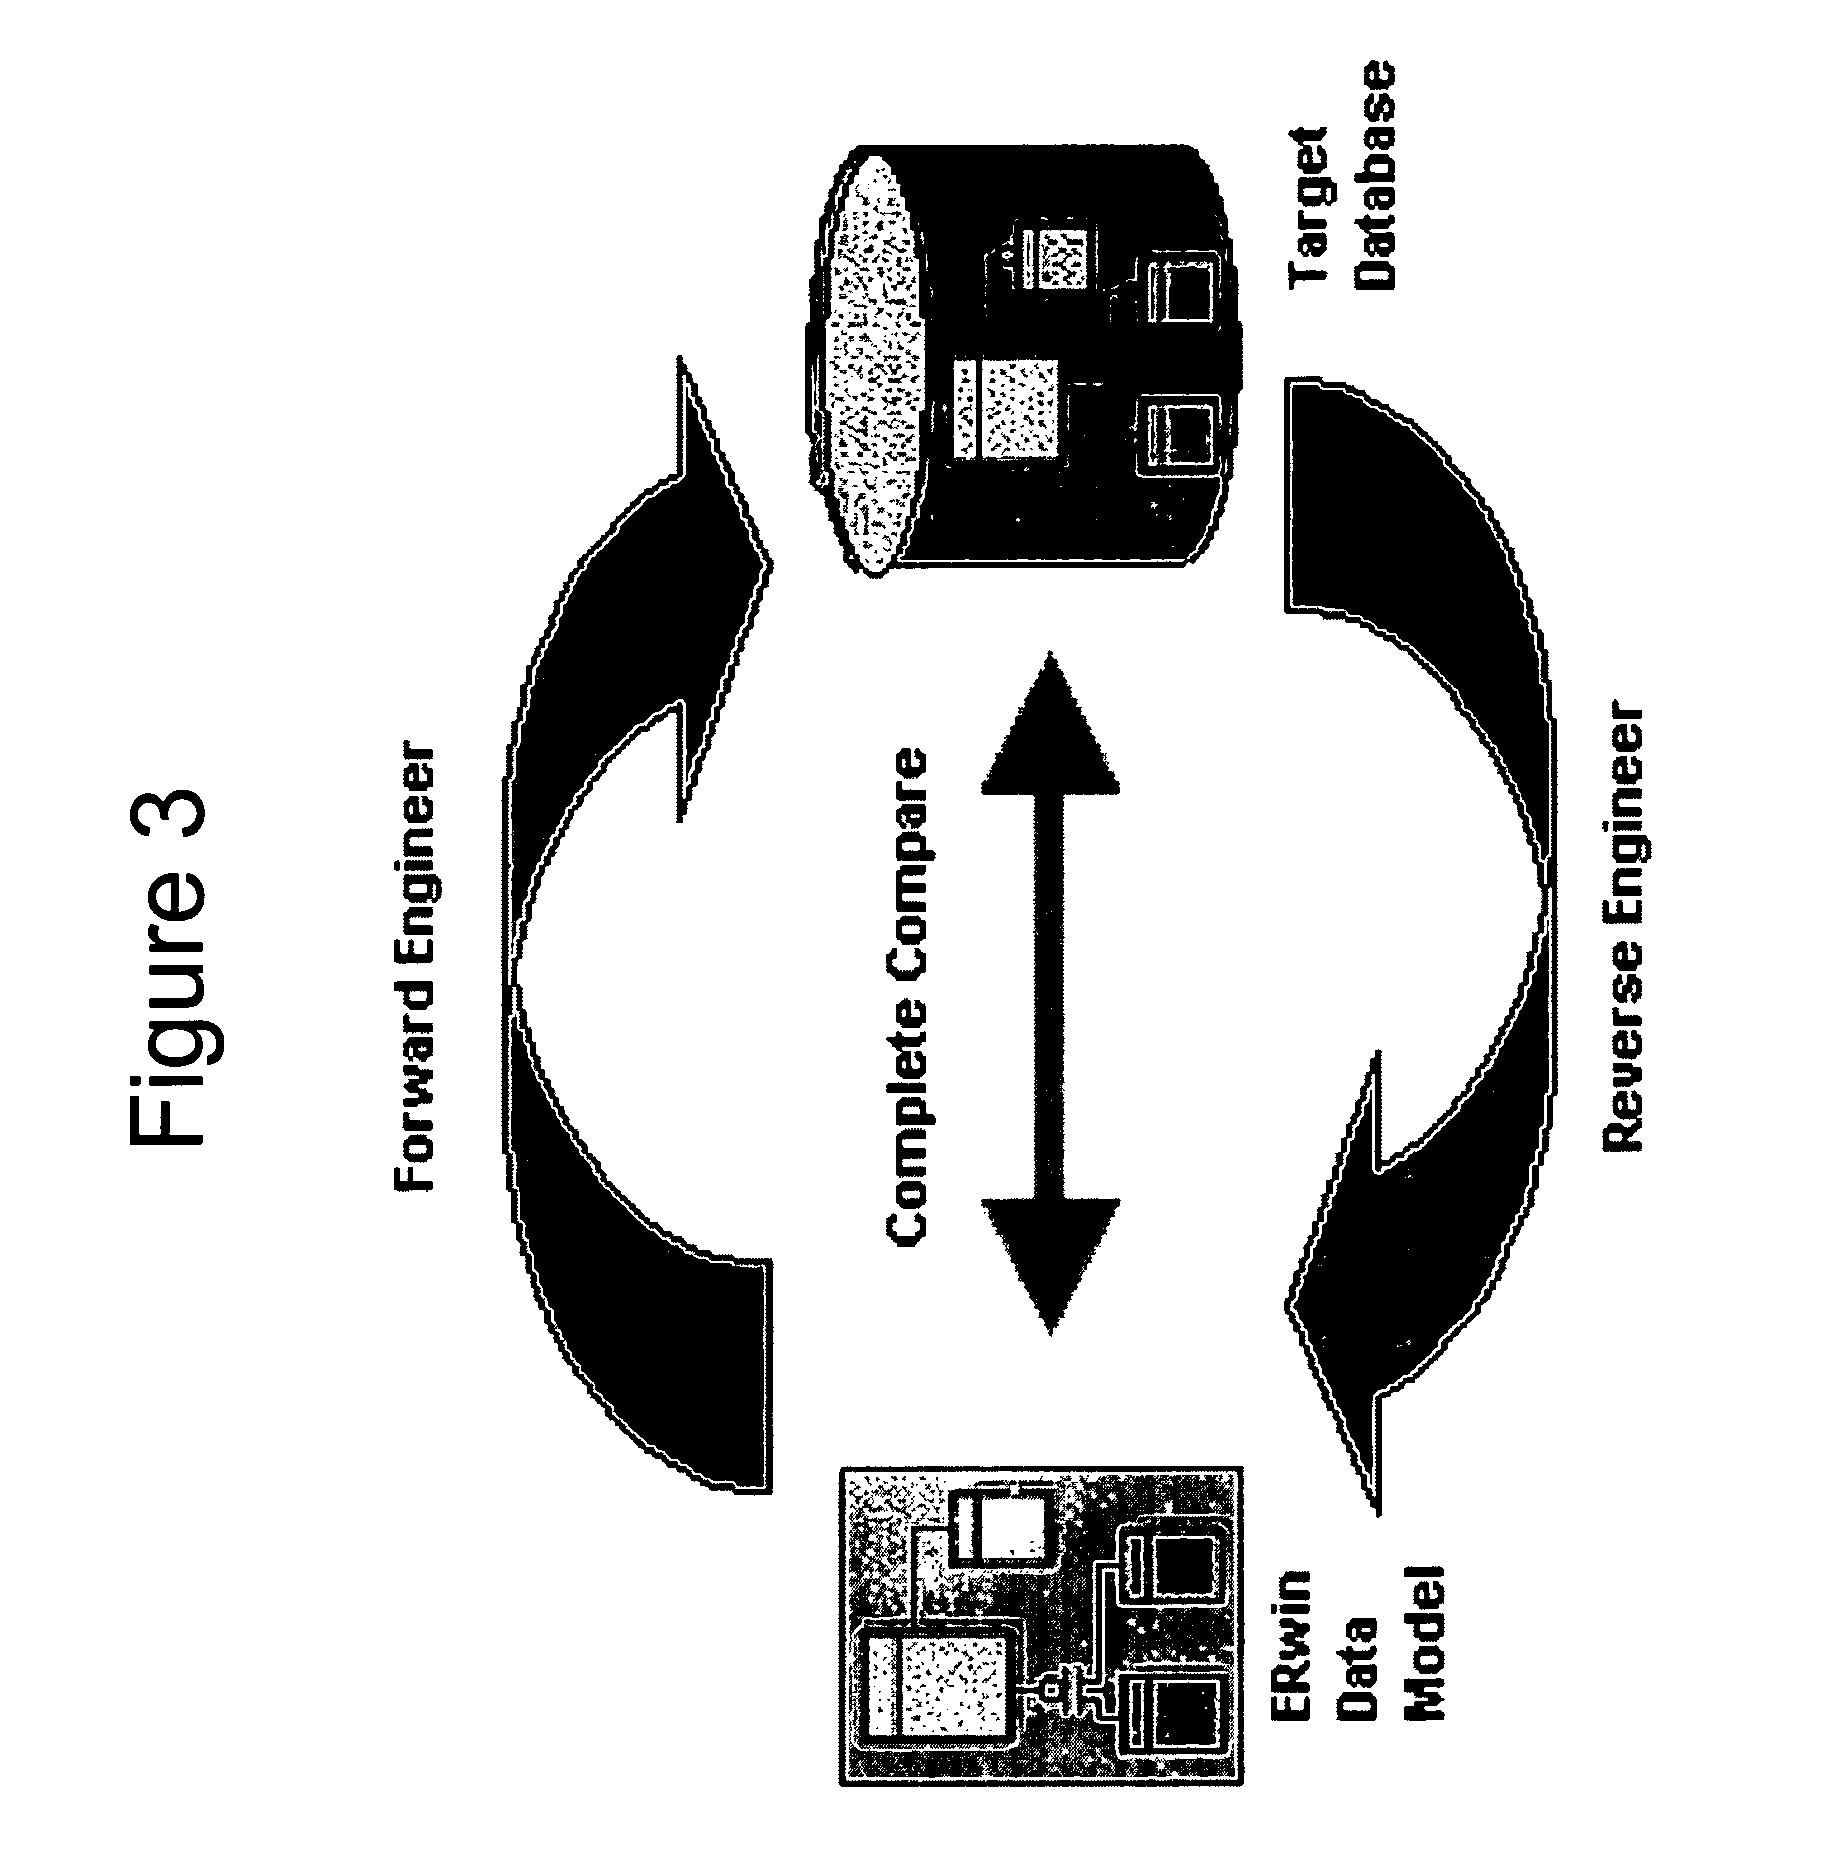 Multi-functional ionic liquid compositions for overcoming polymorphism and imparting improved properties for active pharmaceutical, biological, nutritional, and energetic ingredients